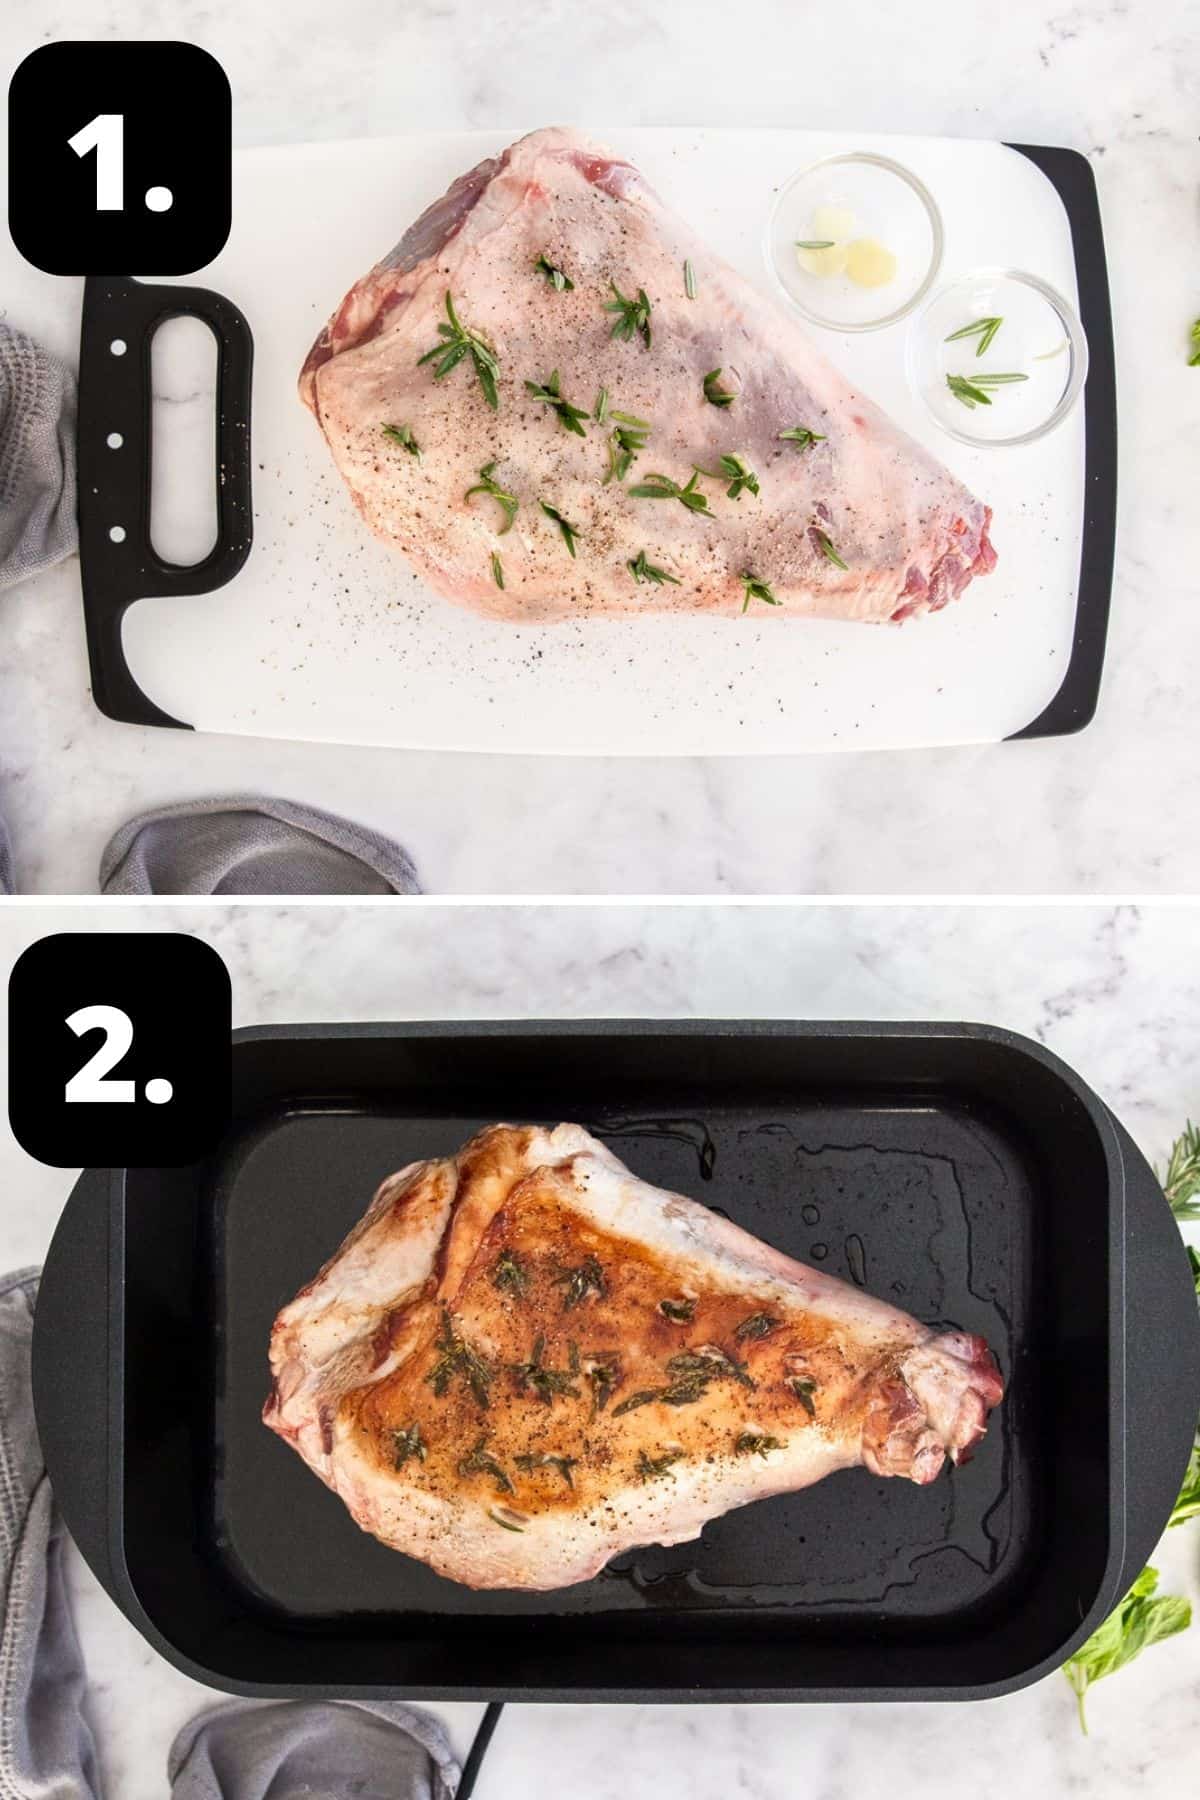 Steps 1-2 of preparing this recipe: seasoning the leg of lamb with garlic, rosemary, salt and pepper and searing it in a pan.